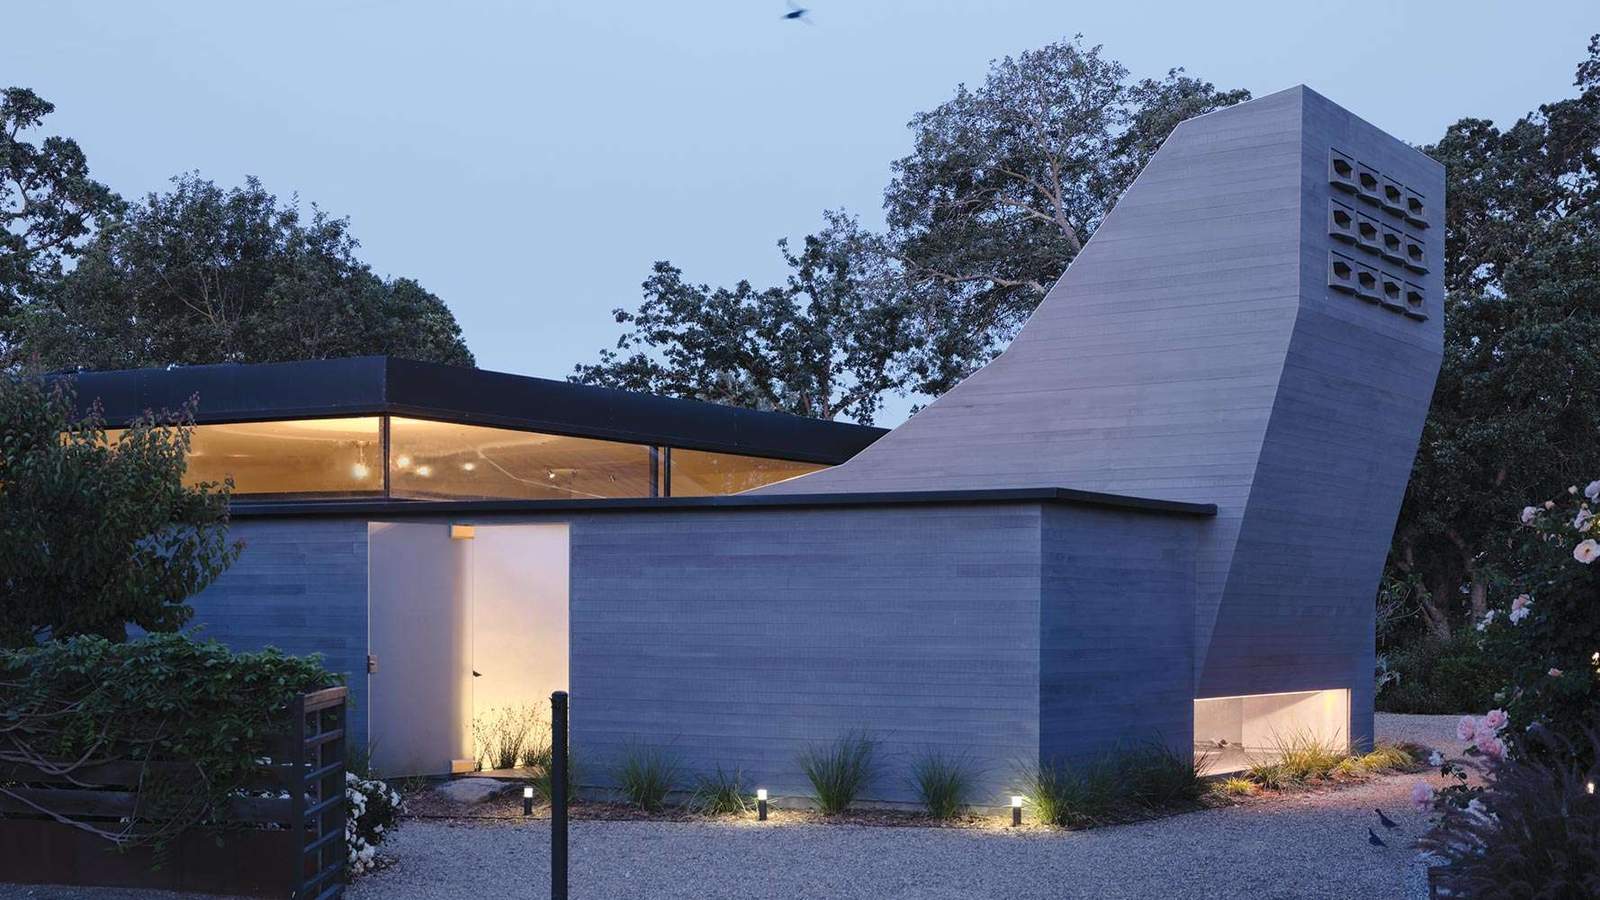 Architect Neal Schwartz Adds a Dovecote Wing onto his Vacation Home